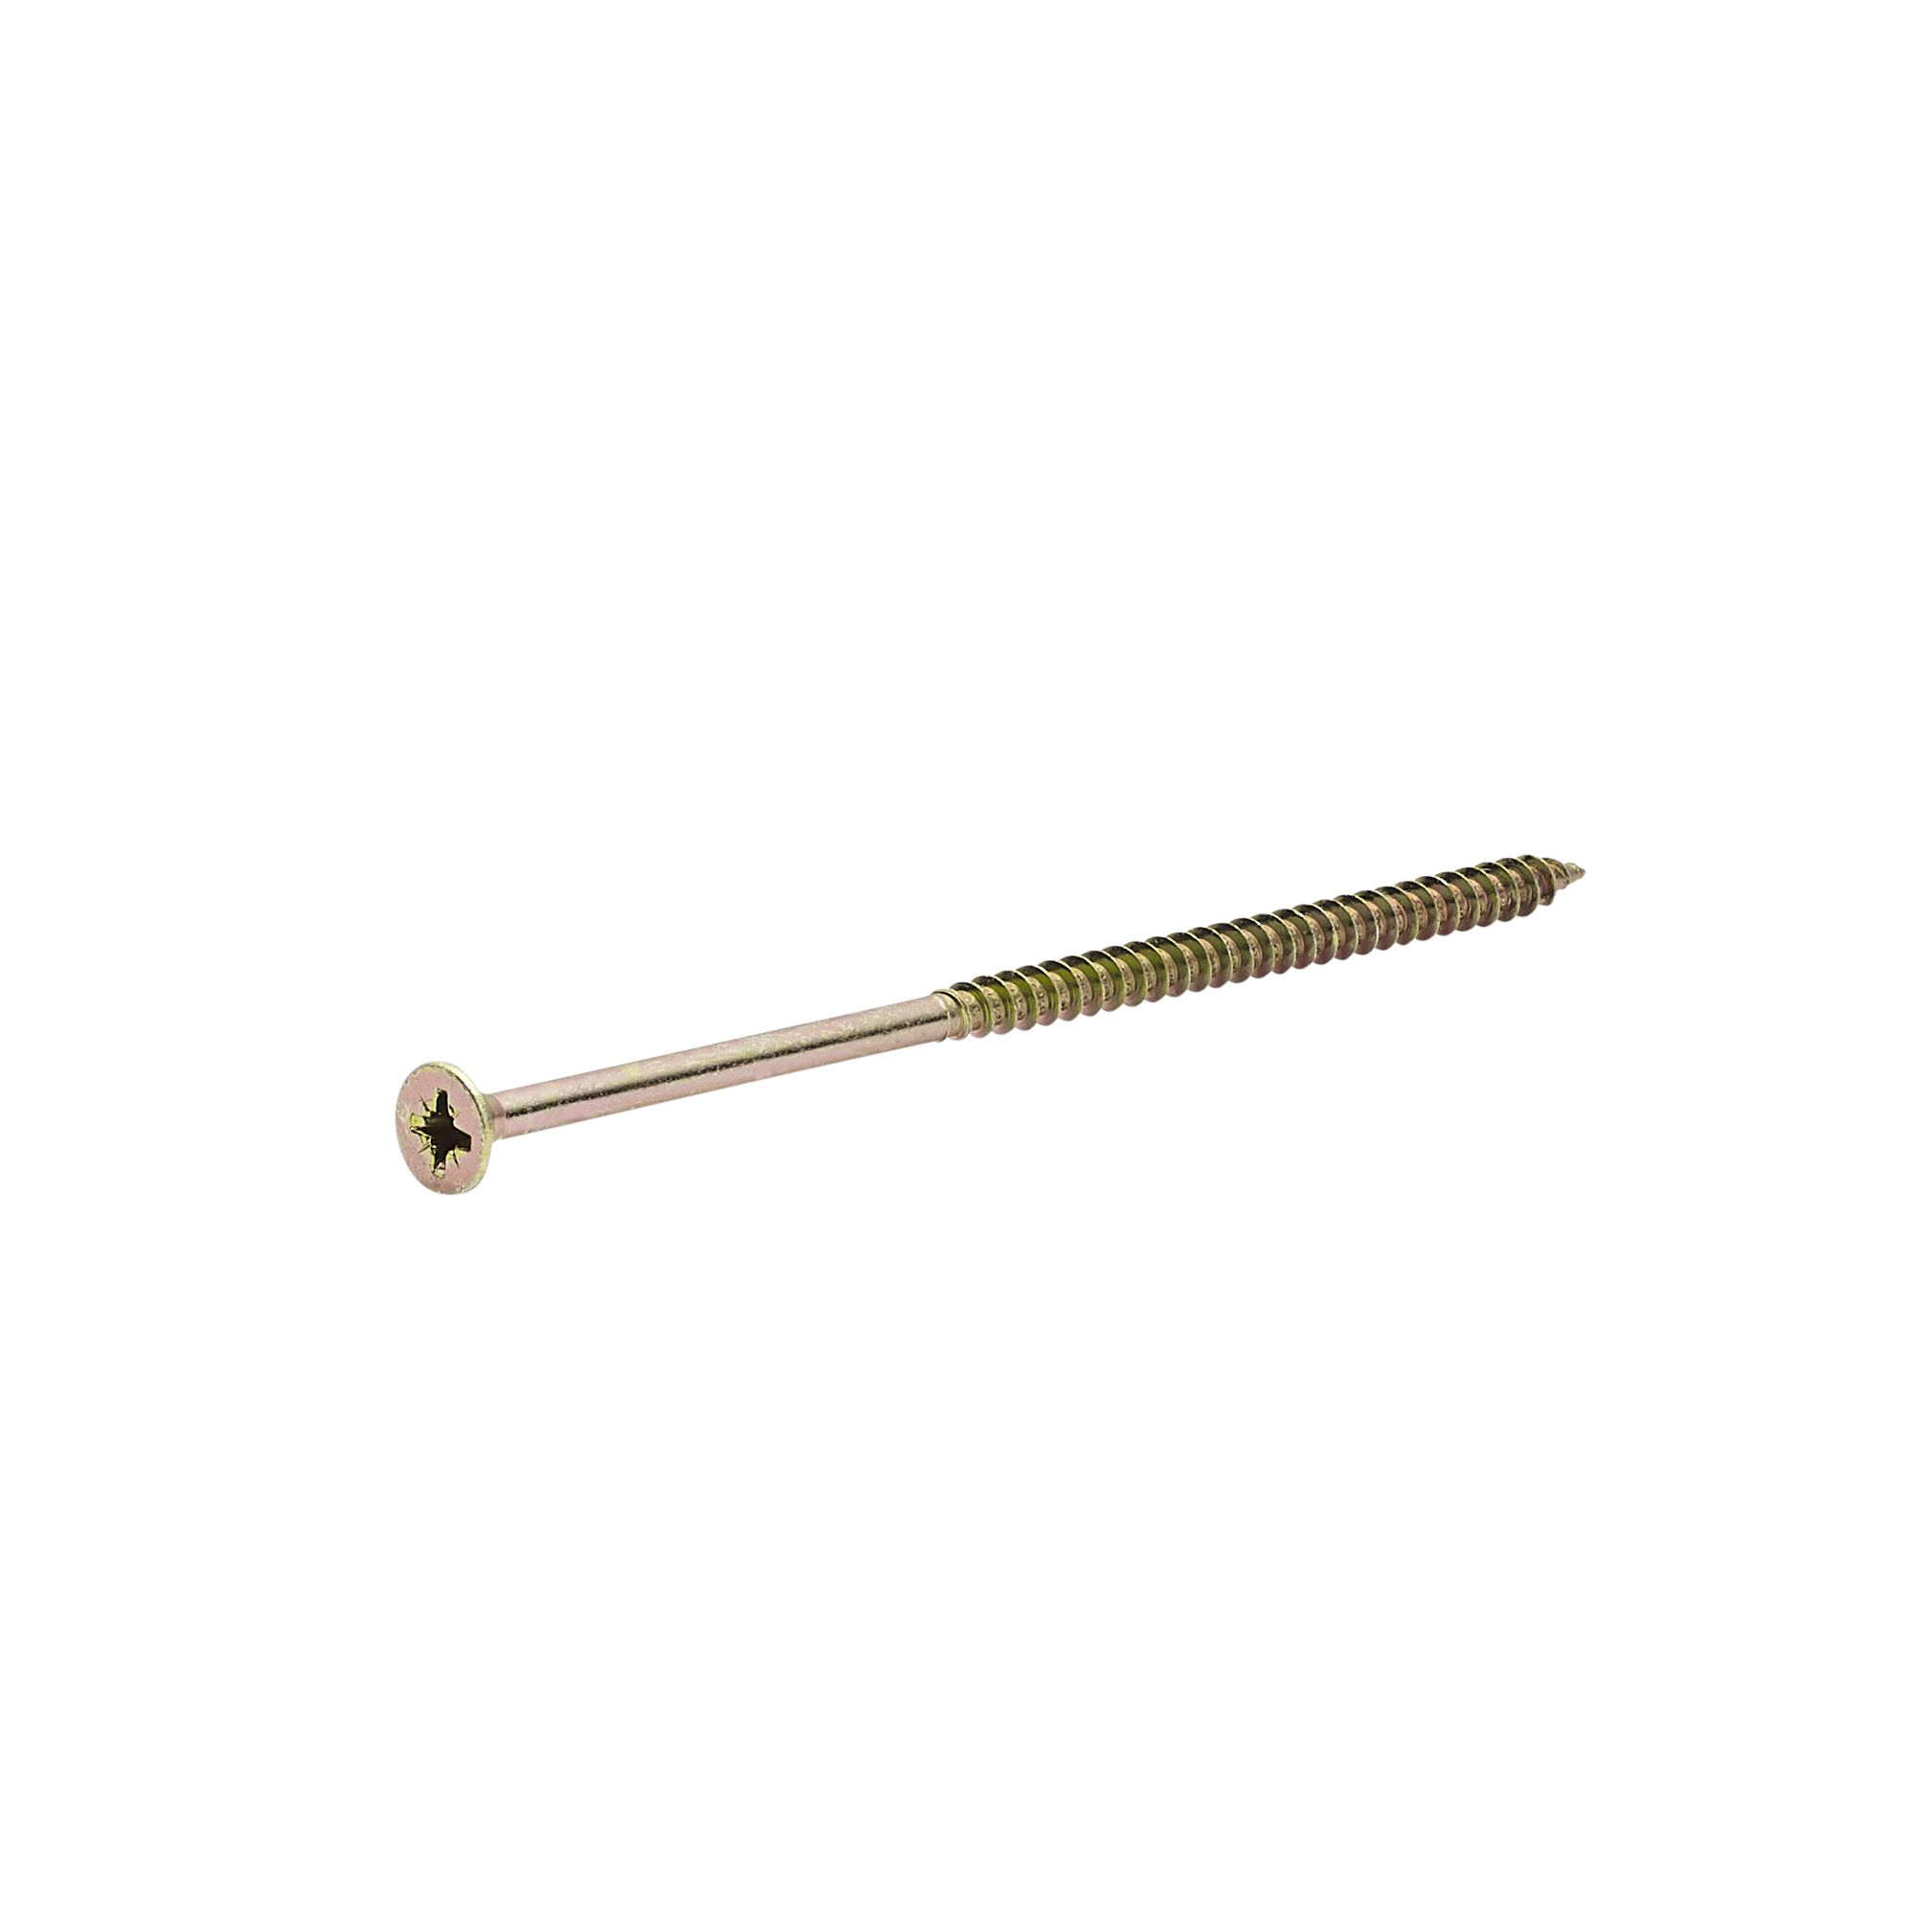 Diall Double-countersunk Yellow-passivated Carbon steel Screw (Dia)5mm (L)120mm, Pack of 100